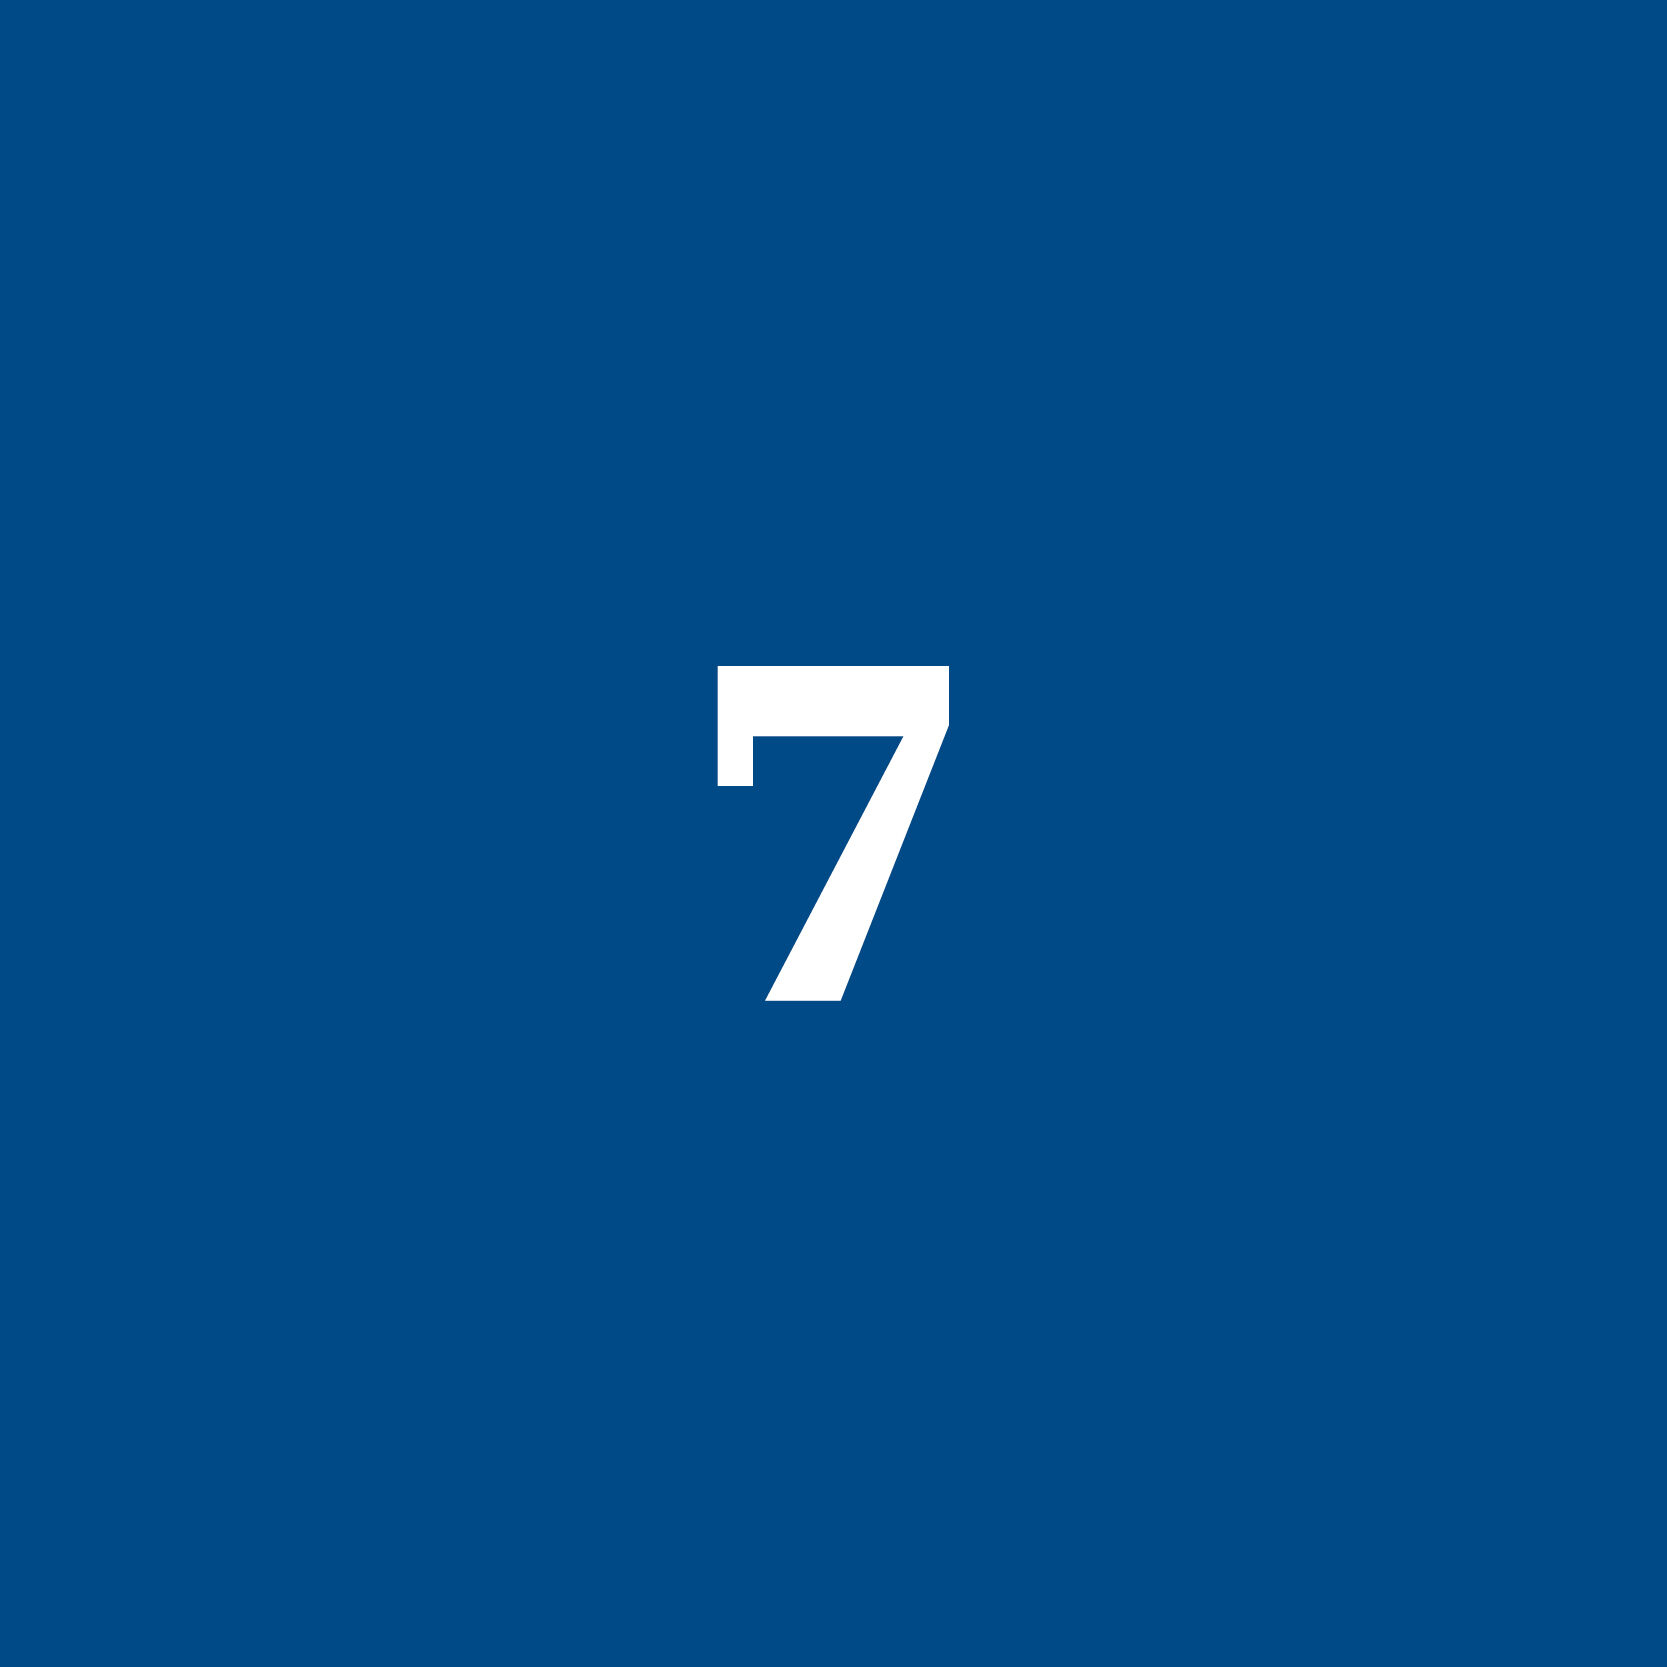 Blue background with a white number 7